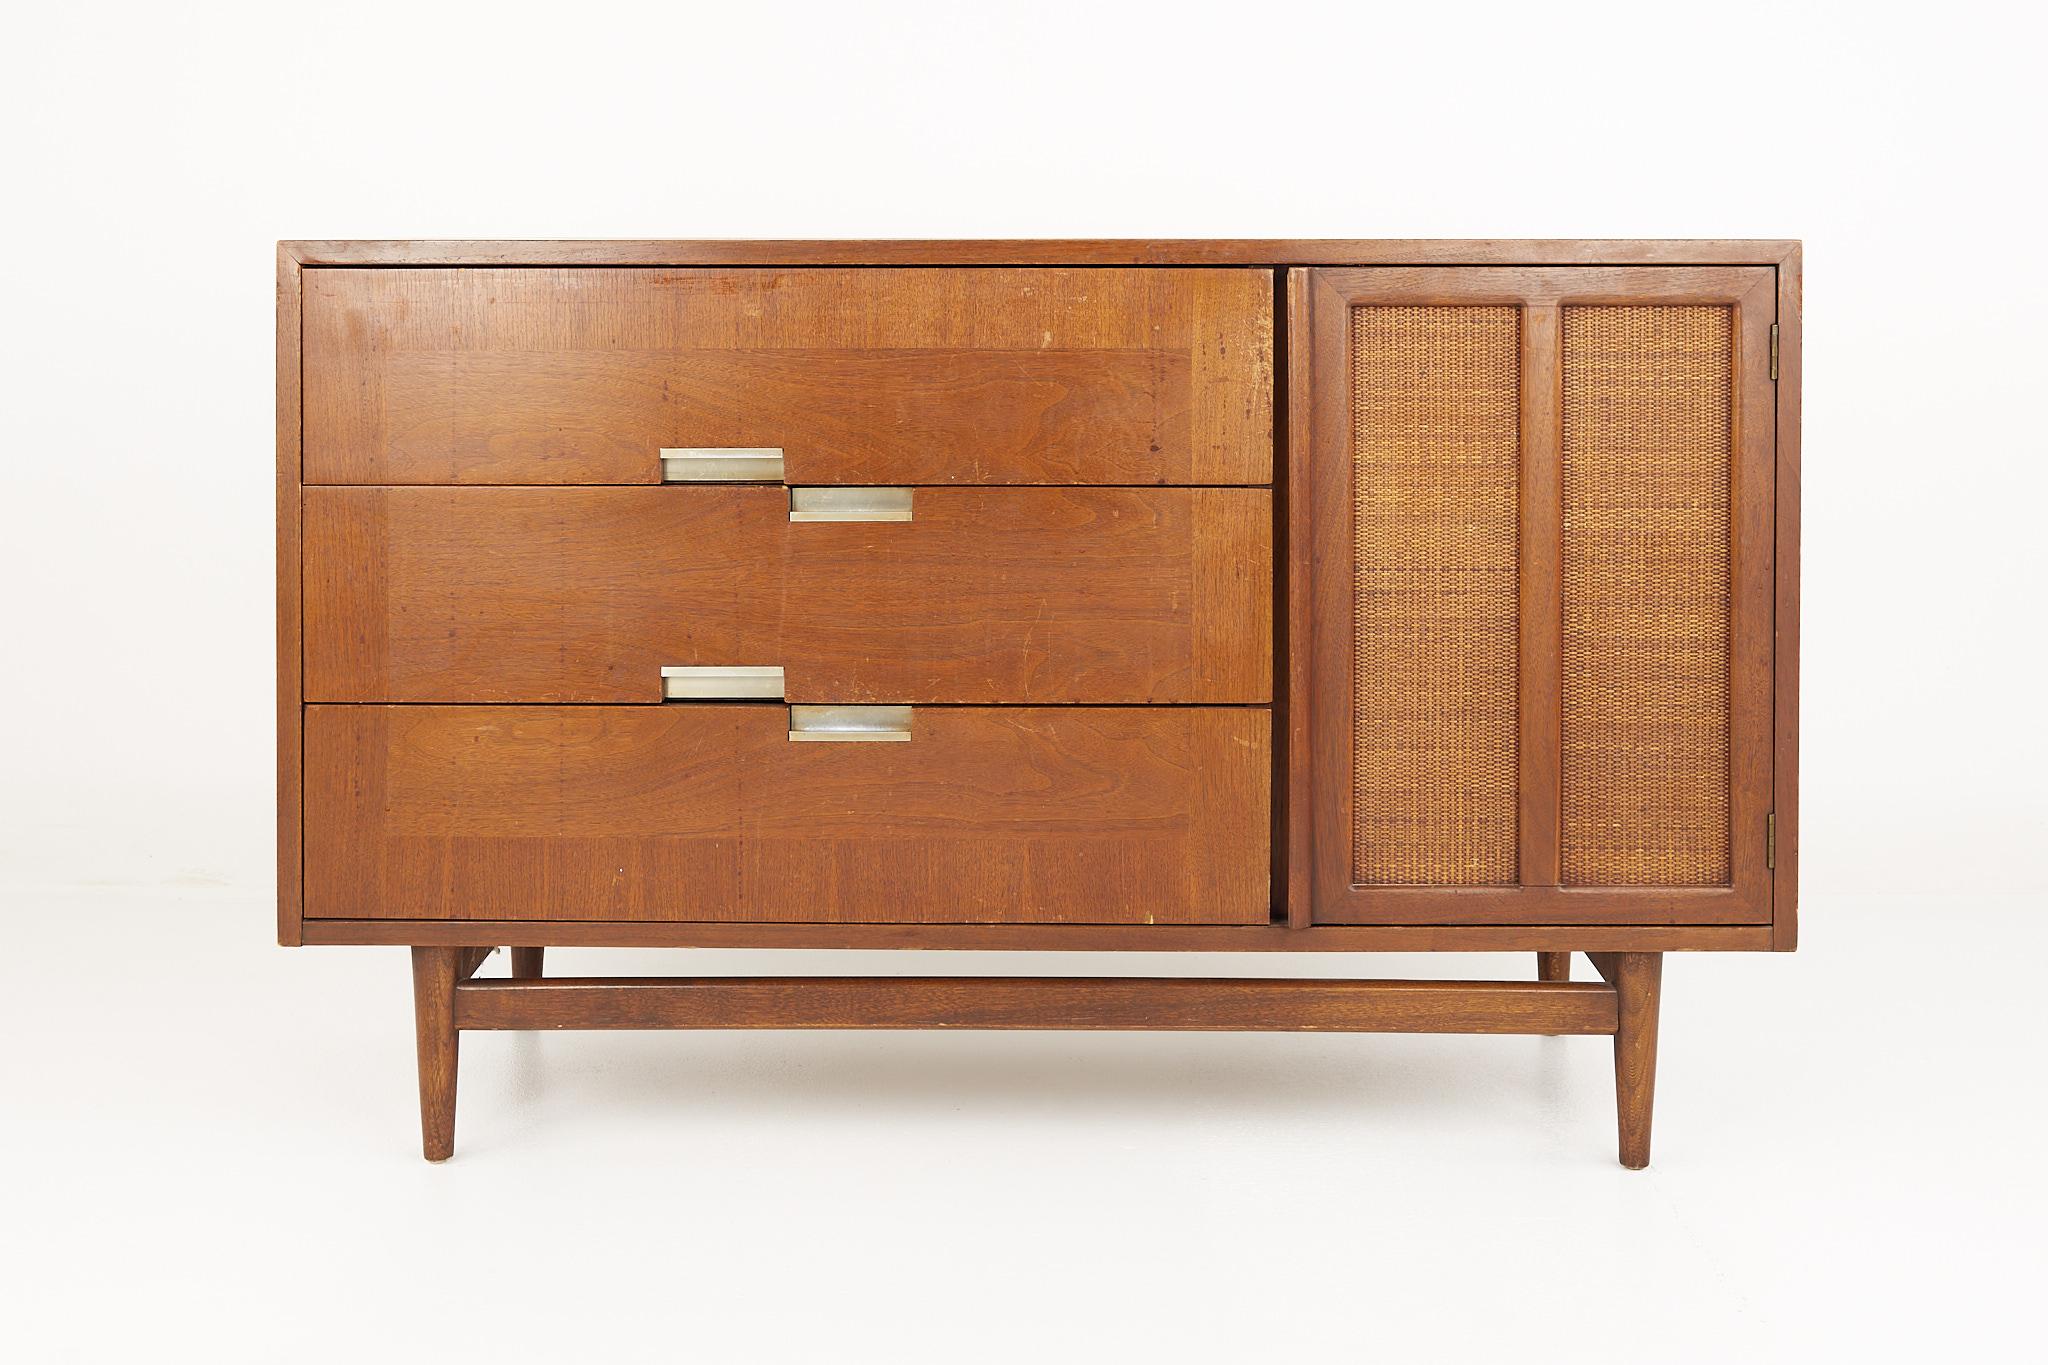 Merton Gershun for American of Martinsville mid century walnut and cane door credenza

This credenza measures: 50 wide x 18.5 deep x 31 inches high

?All pieces of furniture can be had in what we call restored vintage condition. That means the